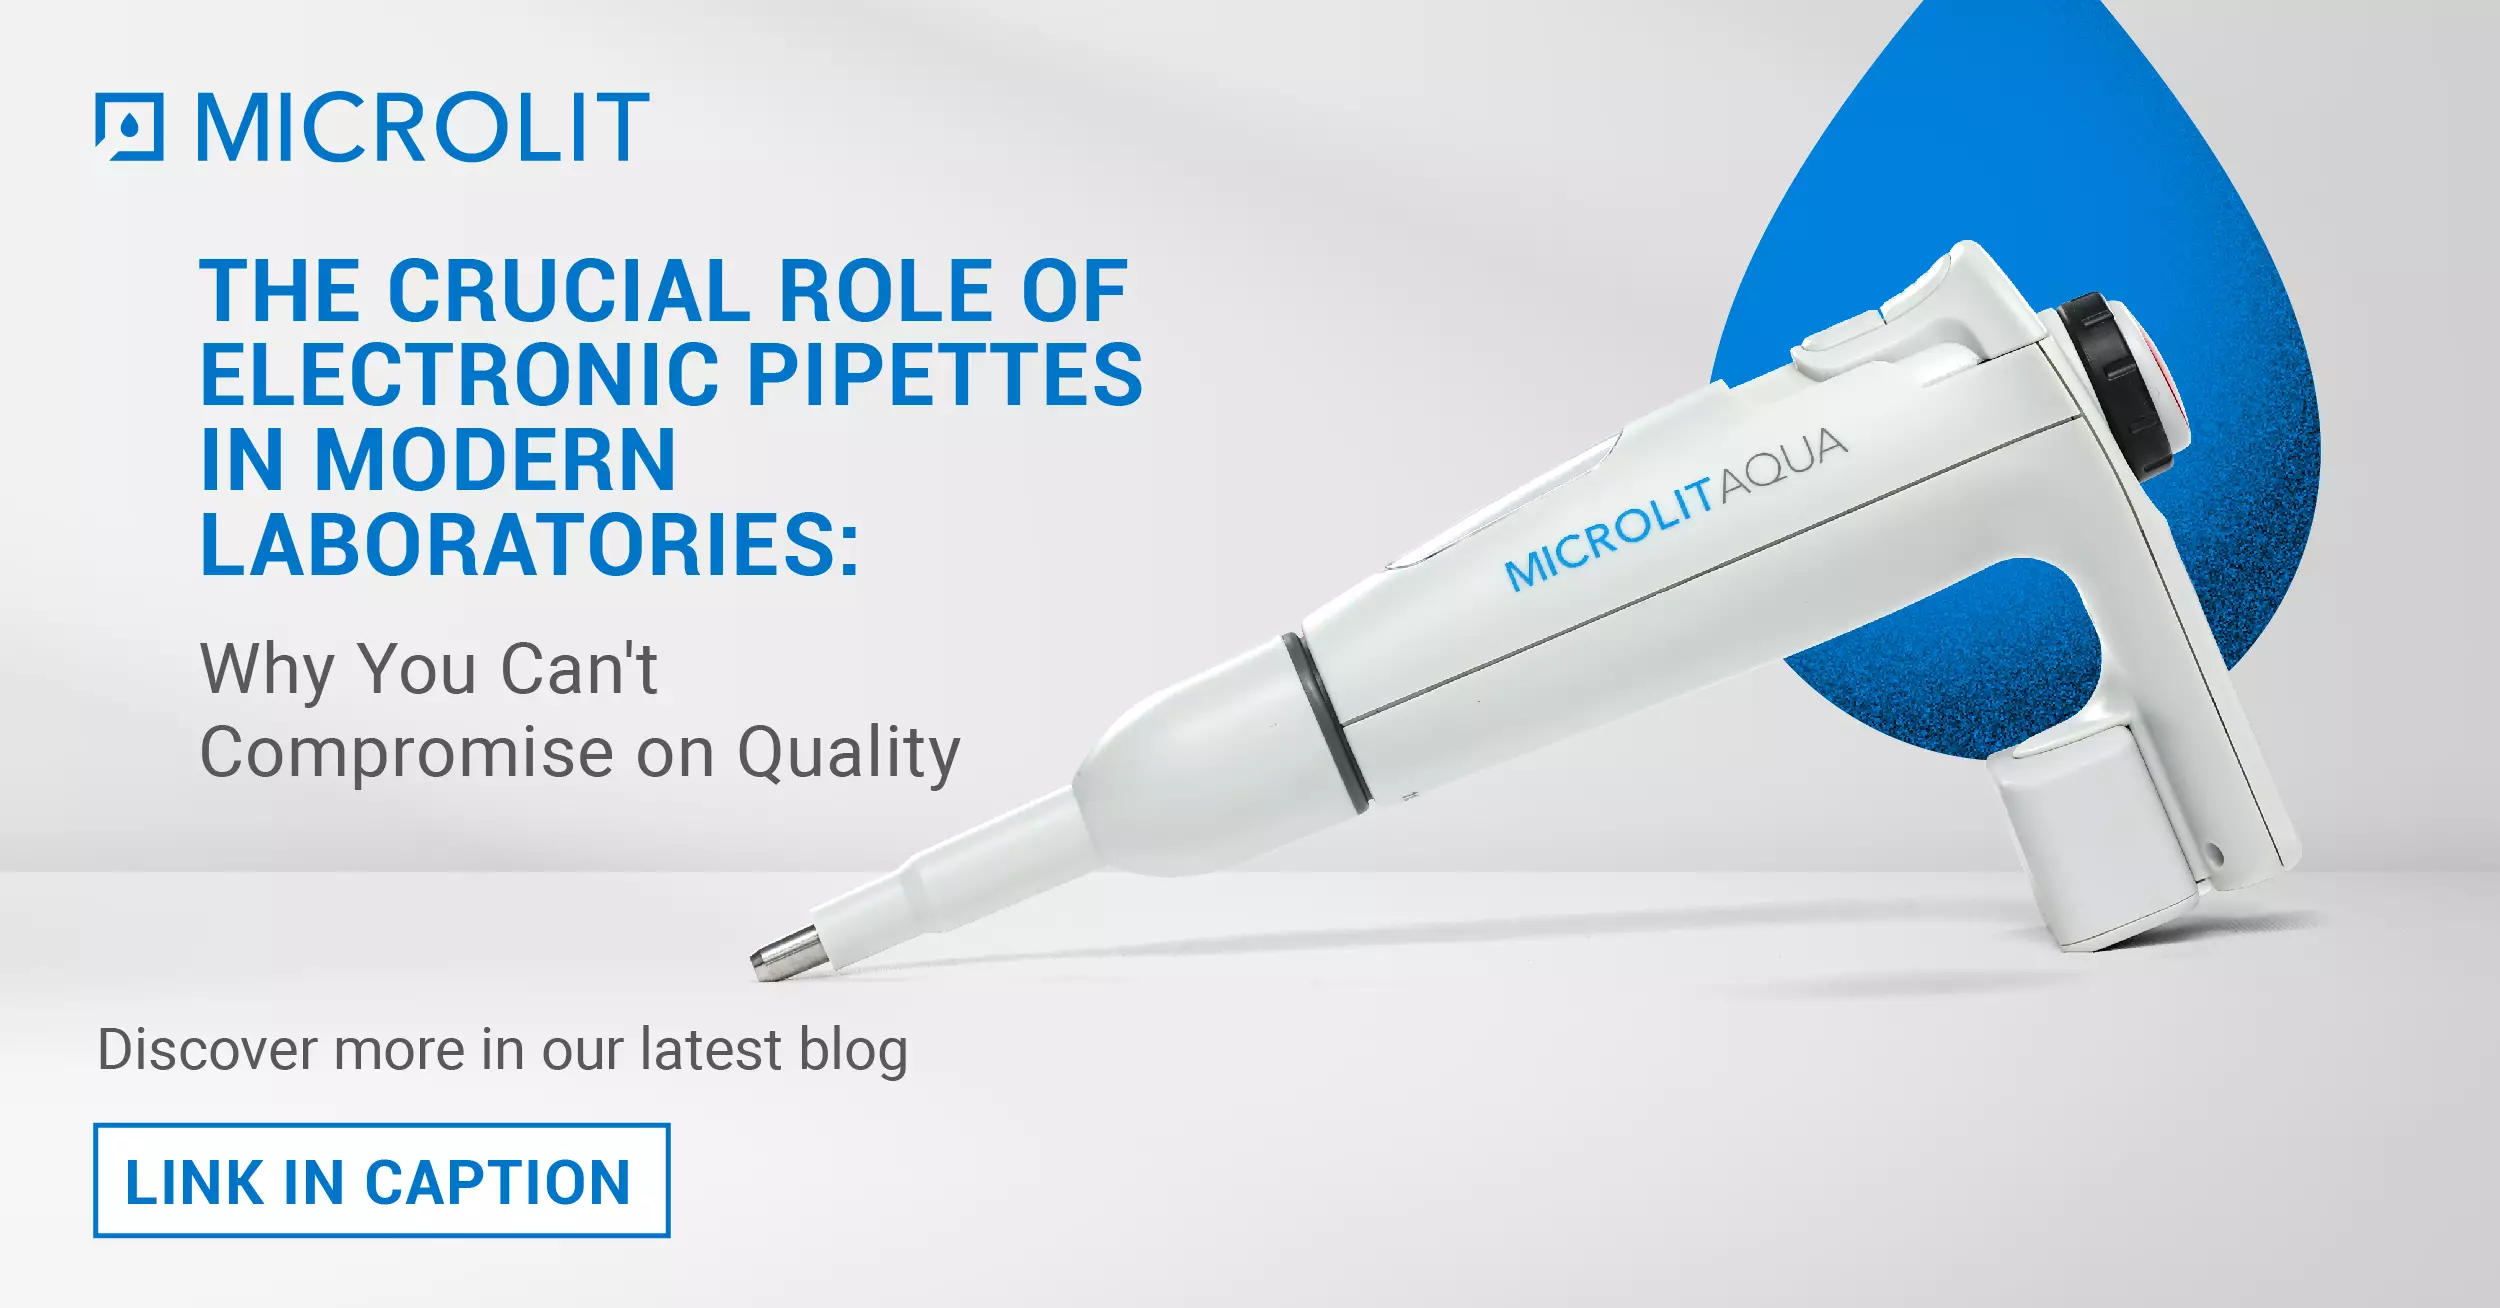 The Crucial Role of Electronic Pipettes in Modern Laboratories